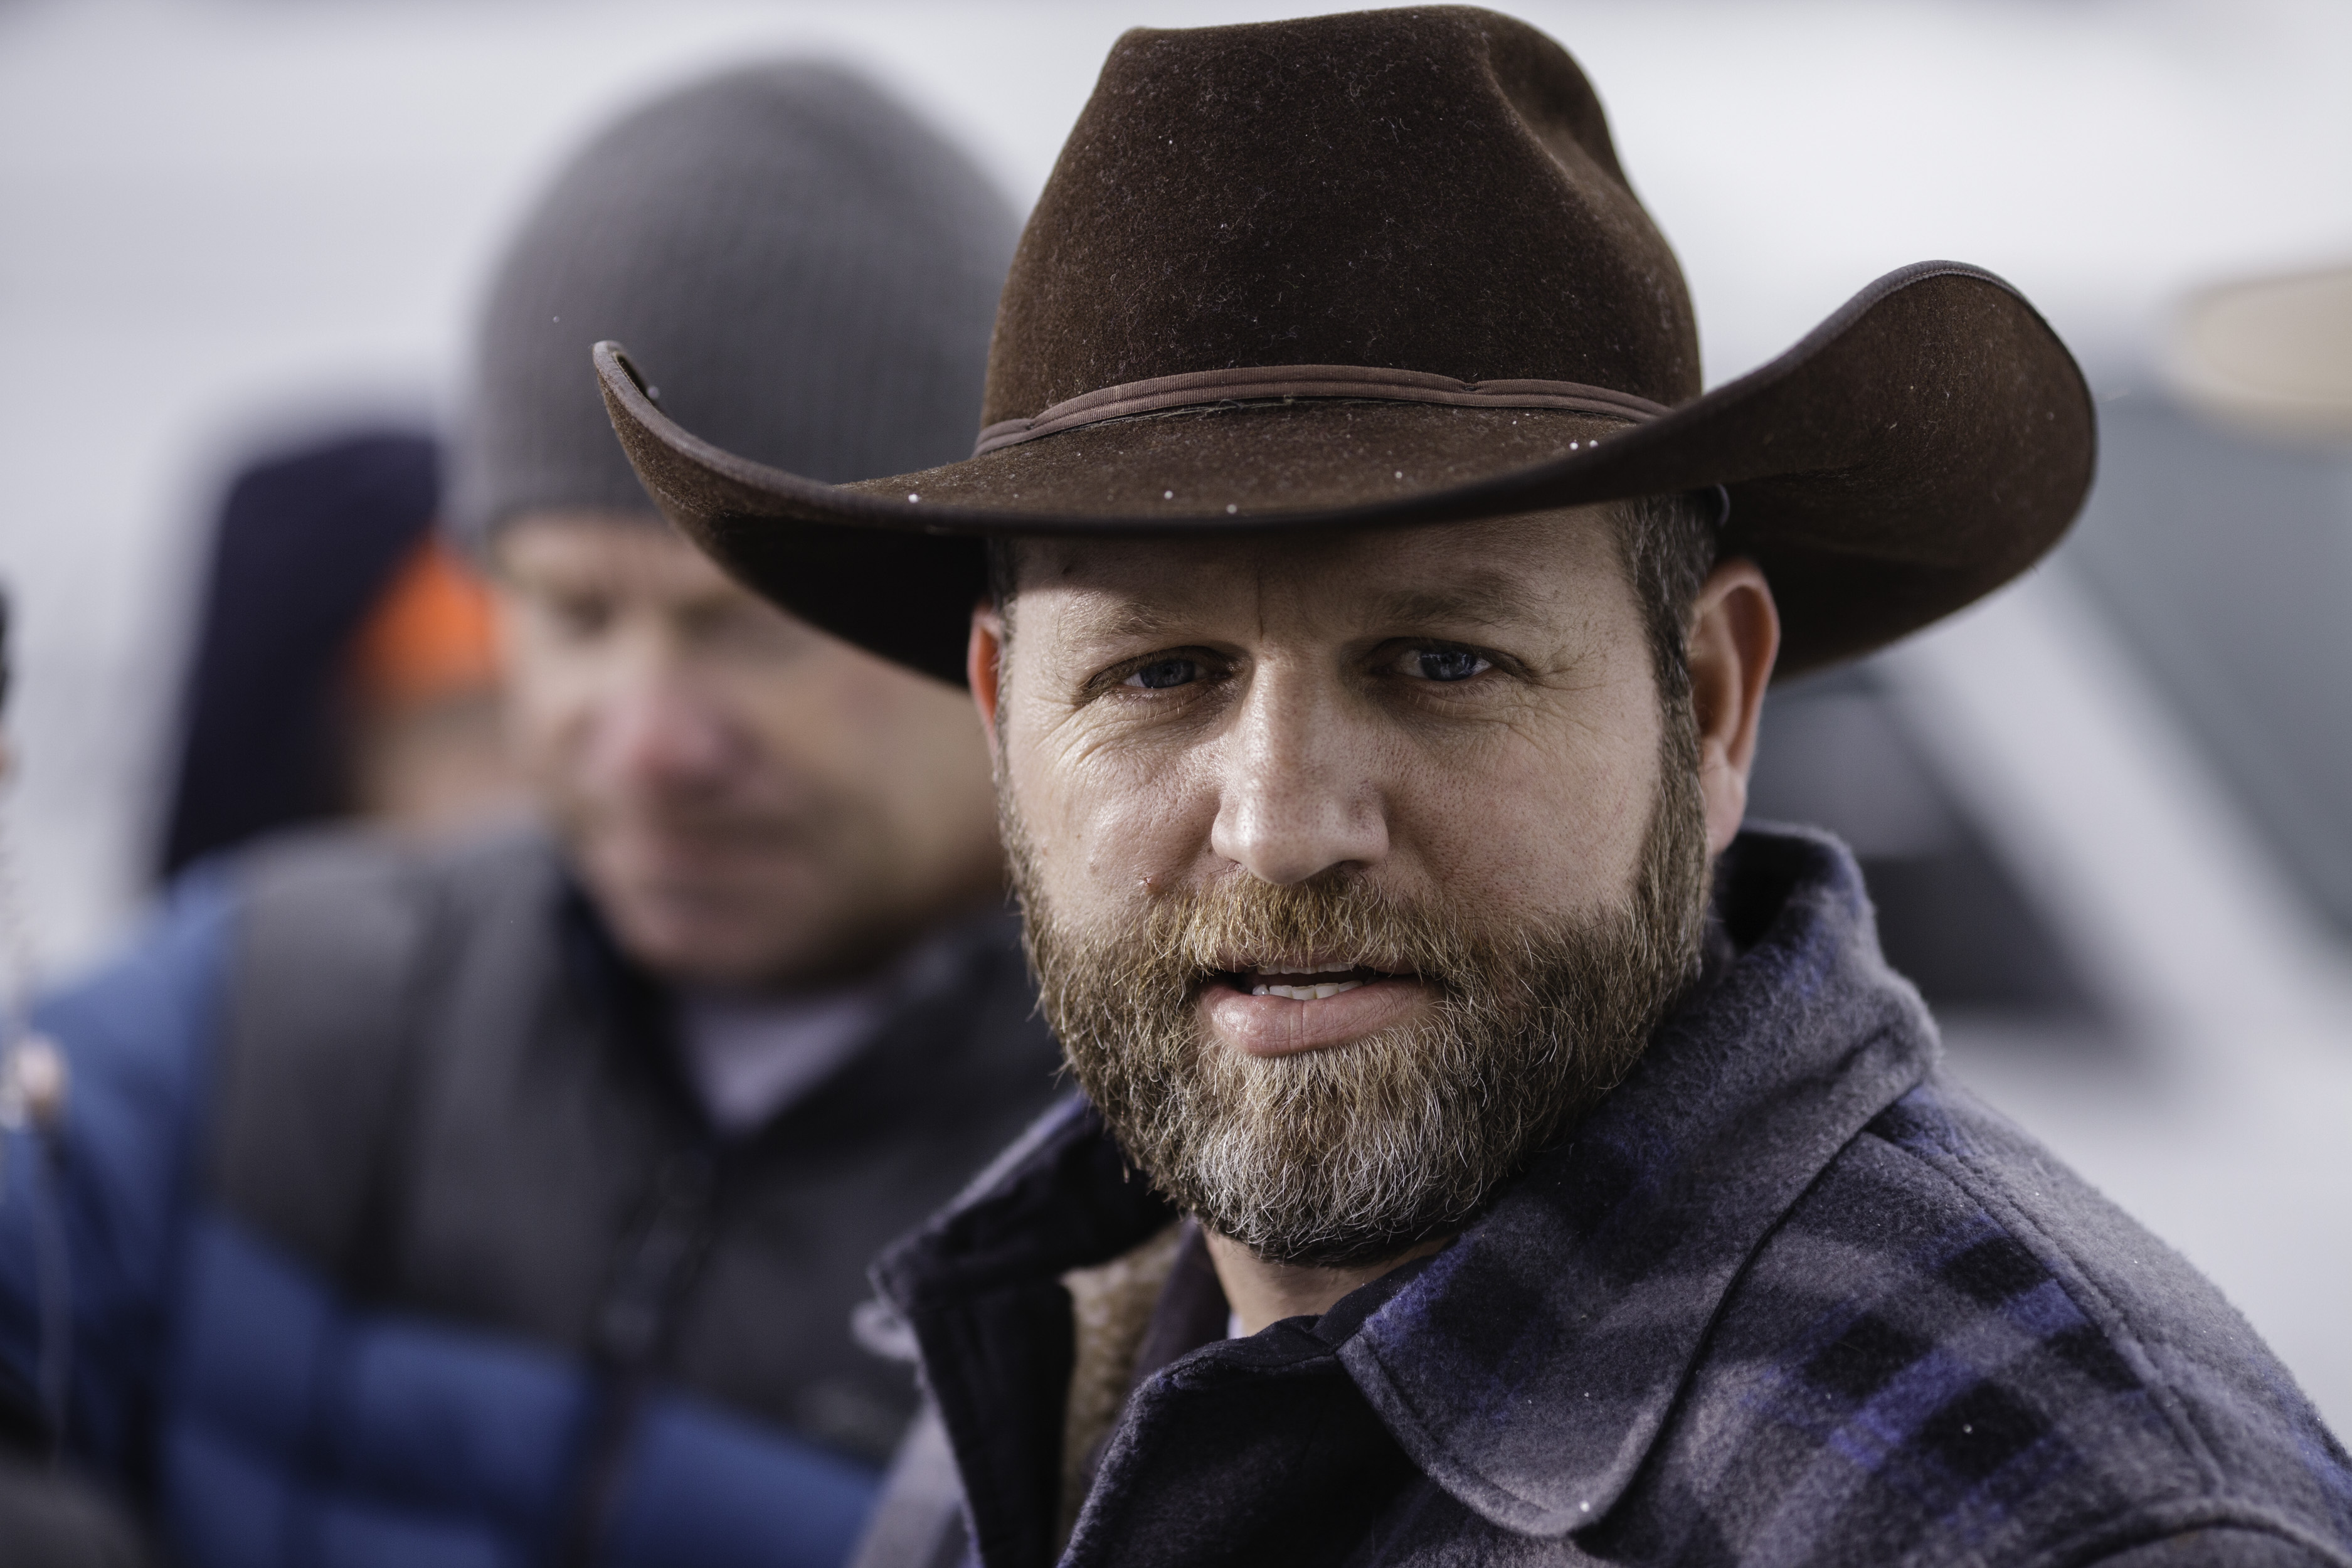 Ammon Bundy speaks at a news conference at the entrance to the Malheur National Wildlife Refuge Headquarters near Burns, Oregon January 5, 2016. (Rob Kerr—AFP/Getty Images)